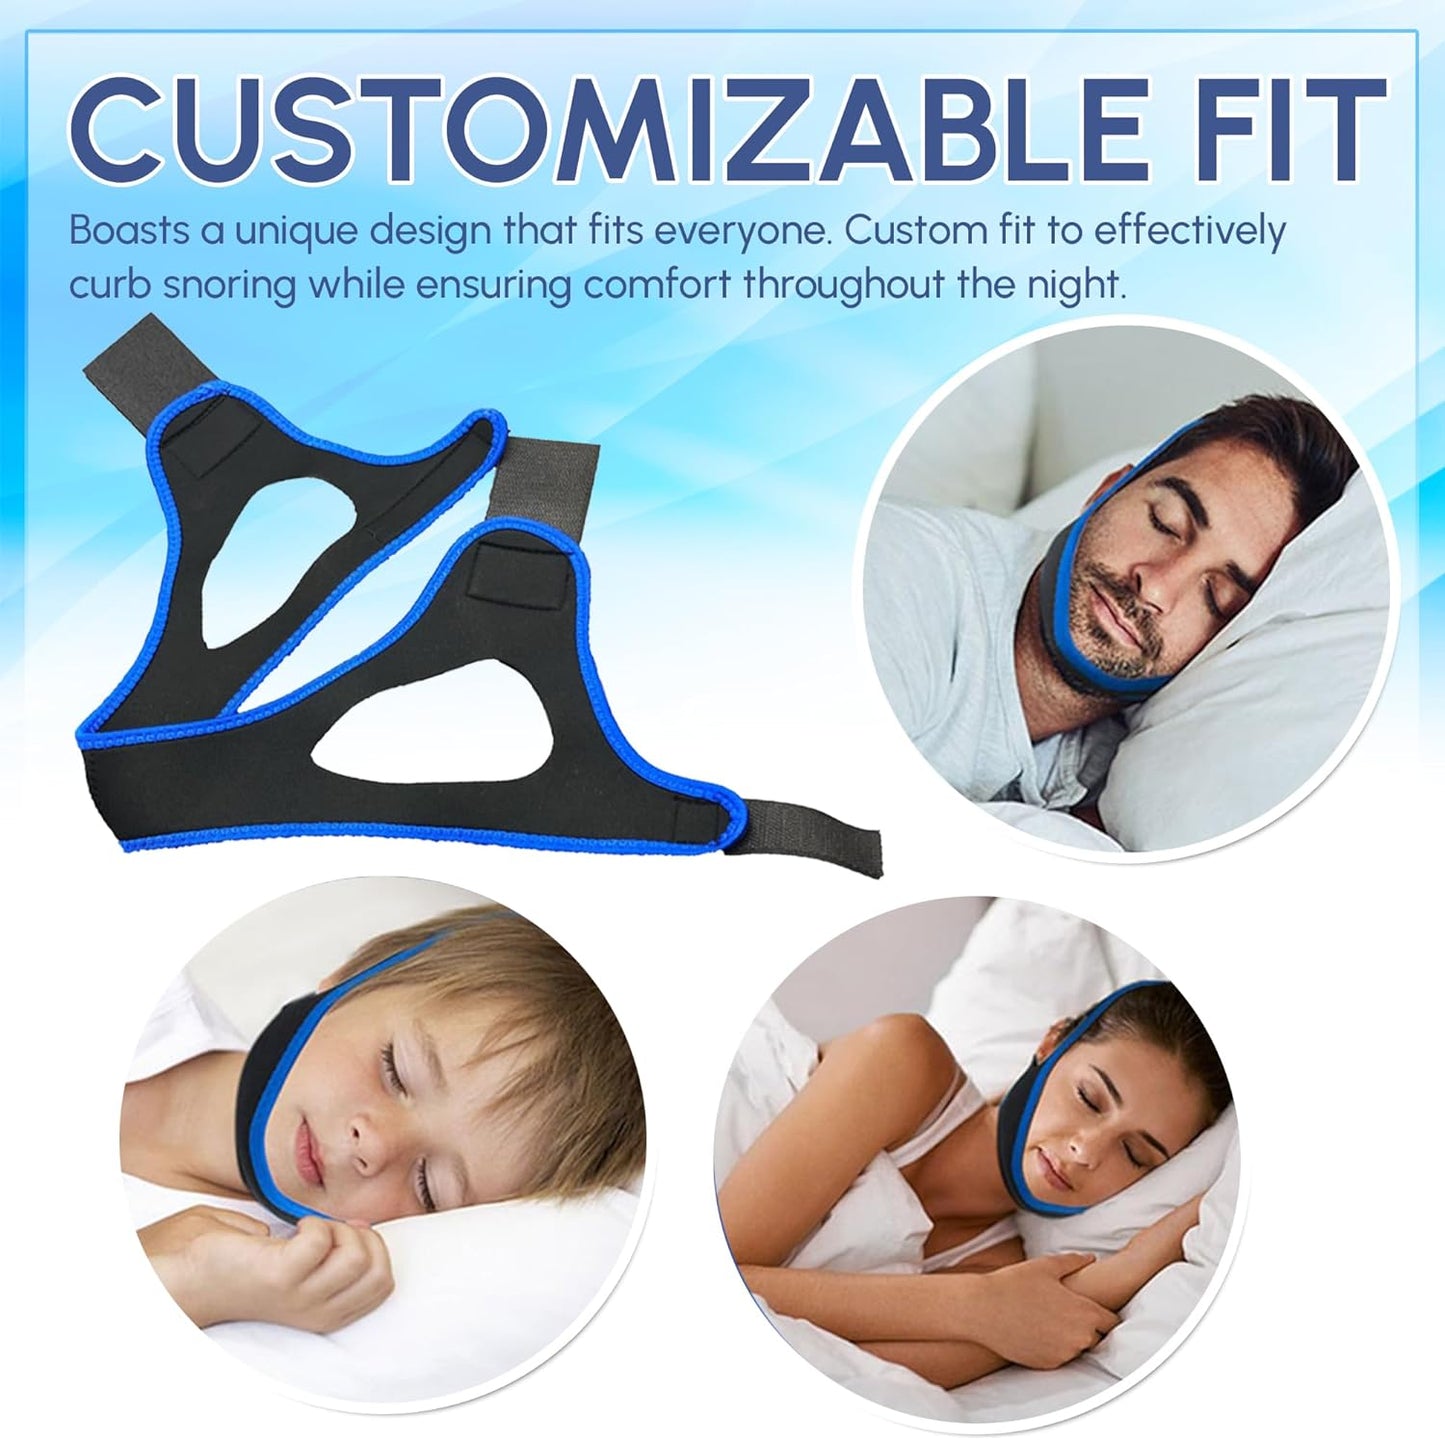 Adjustable anti Snore Chin Strap for Effective Snoring Solution - Breathable CPAP Alternative - Unisex, Chin Strap for Snoring